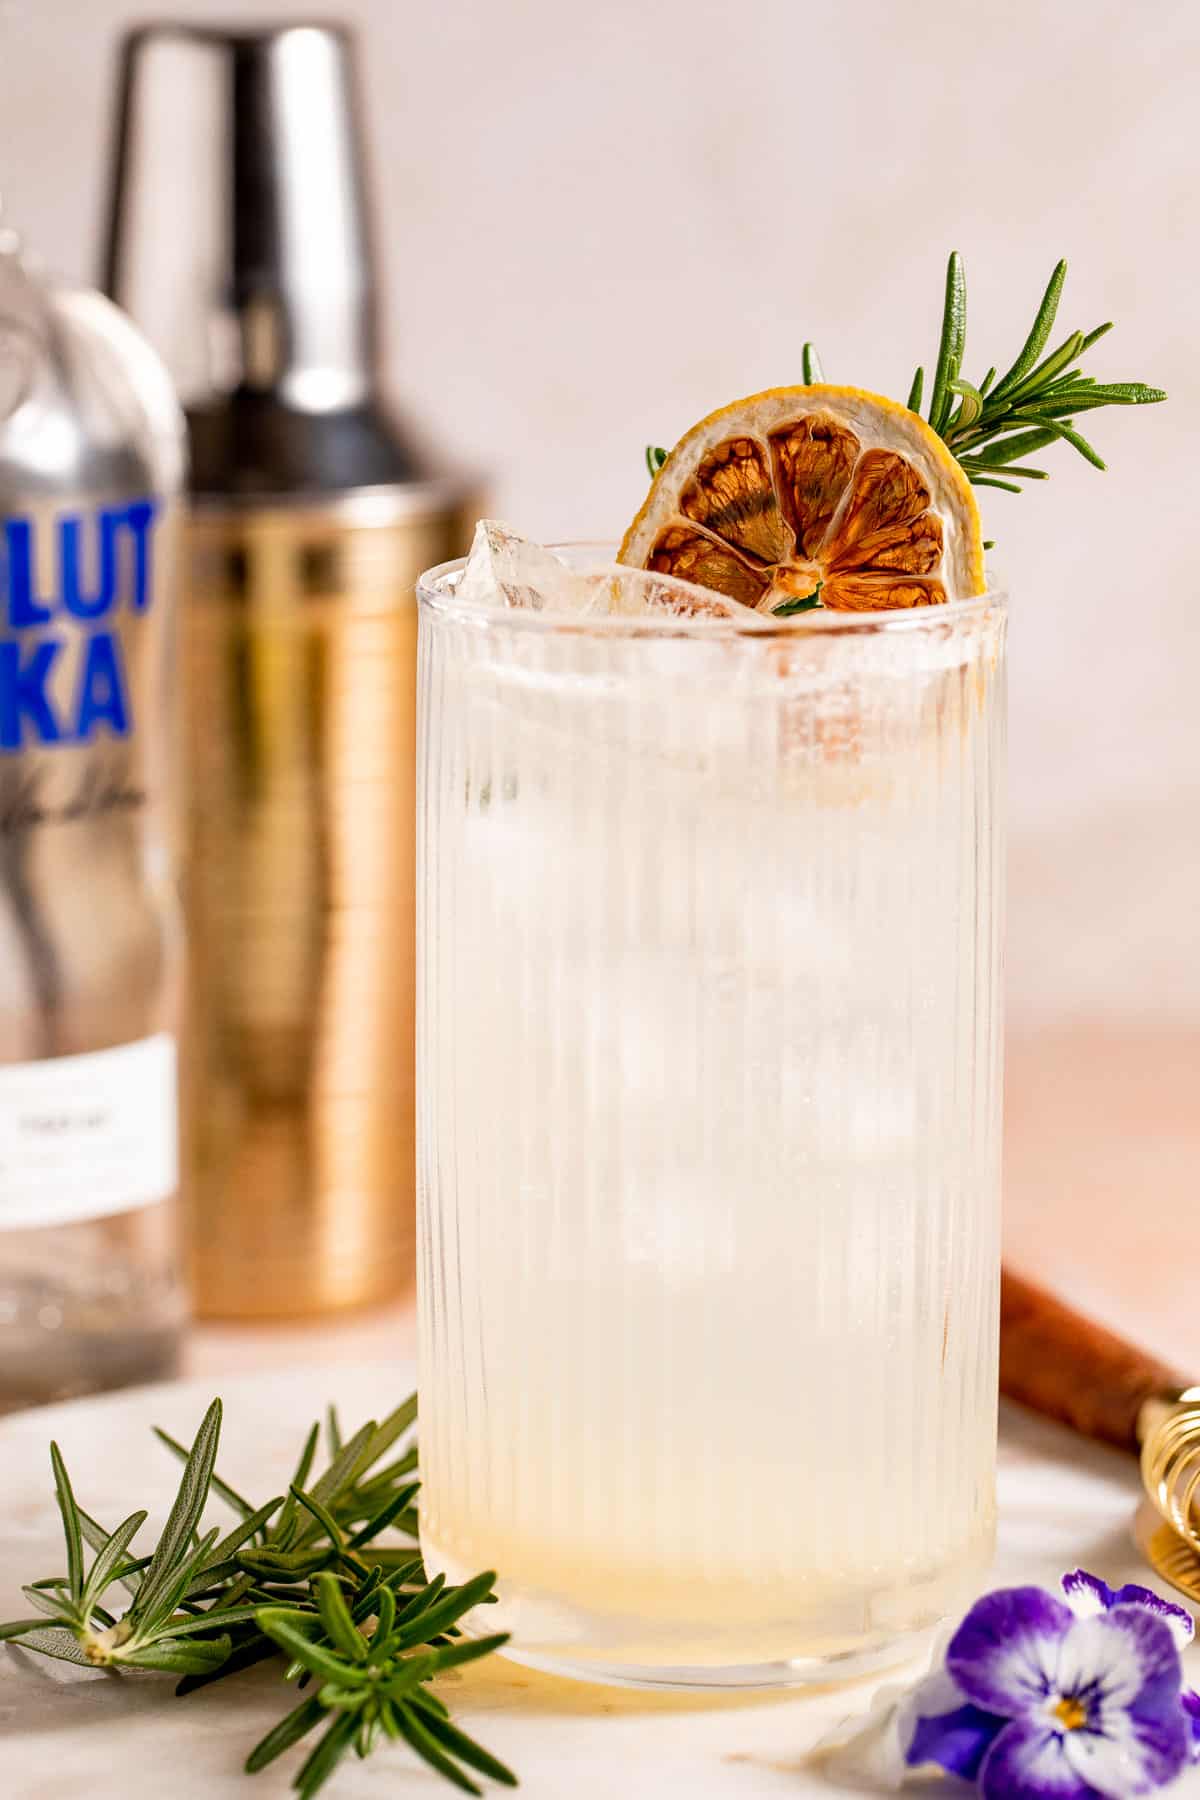 A Vodka Collins cocktail in a serving glass garnished with an orange slice and fresh herbs.